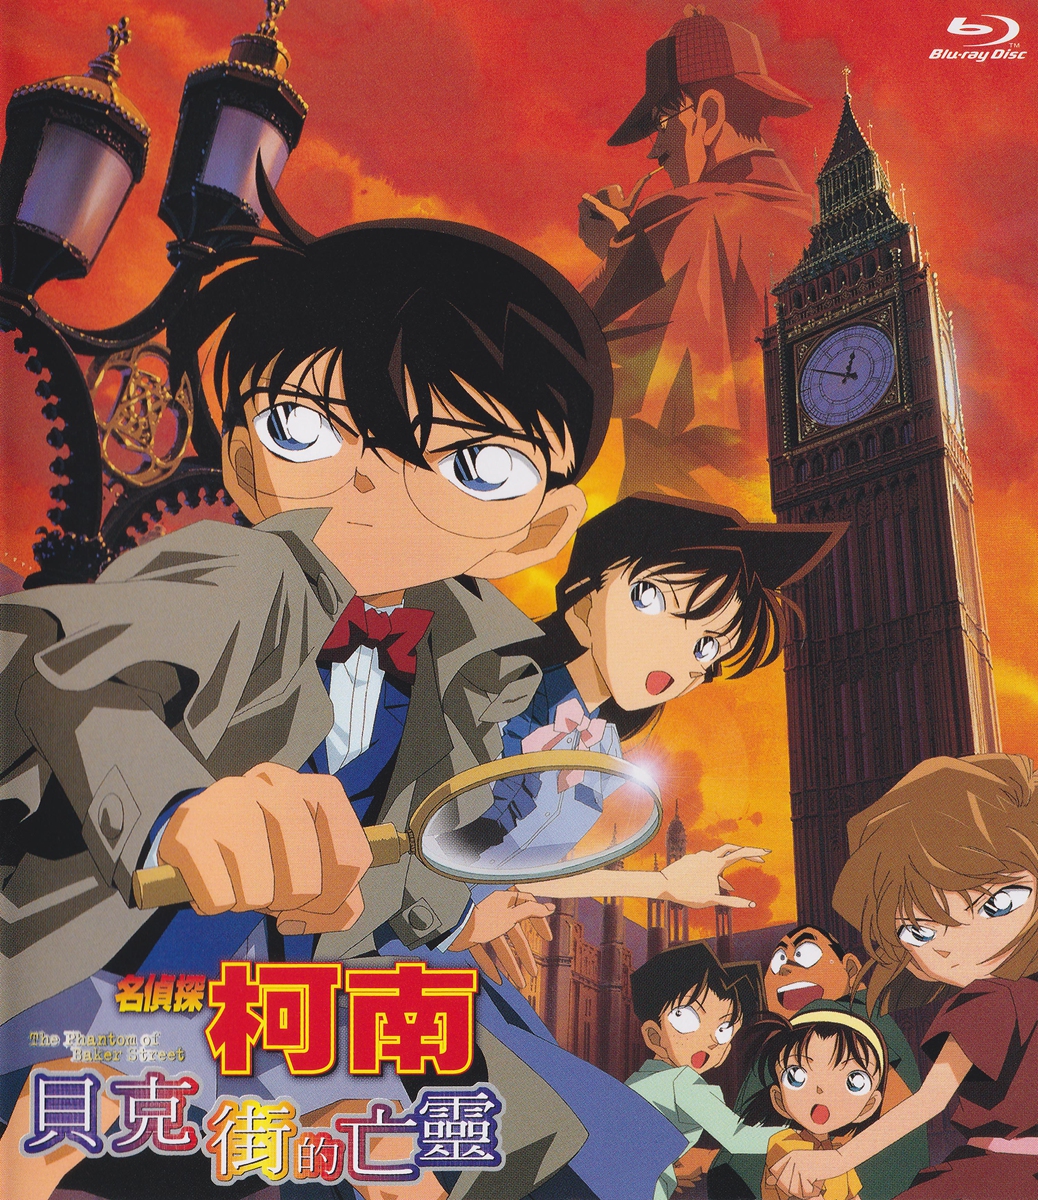 Promotional material for Detective Conan: The Phantom of Baker Street Photo: Courtesy of Maoyan